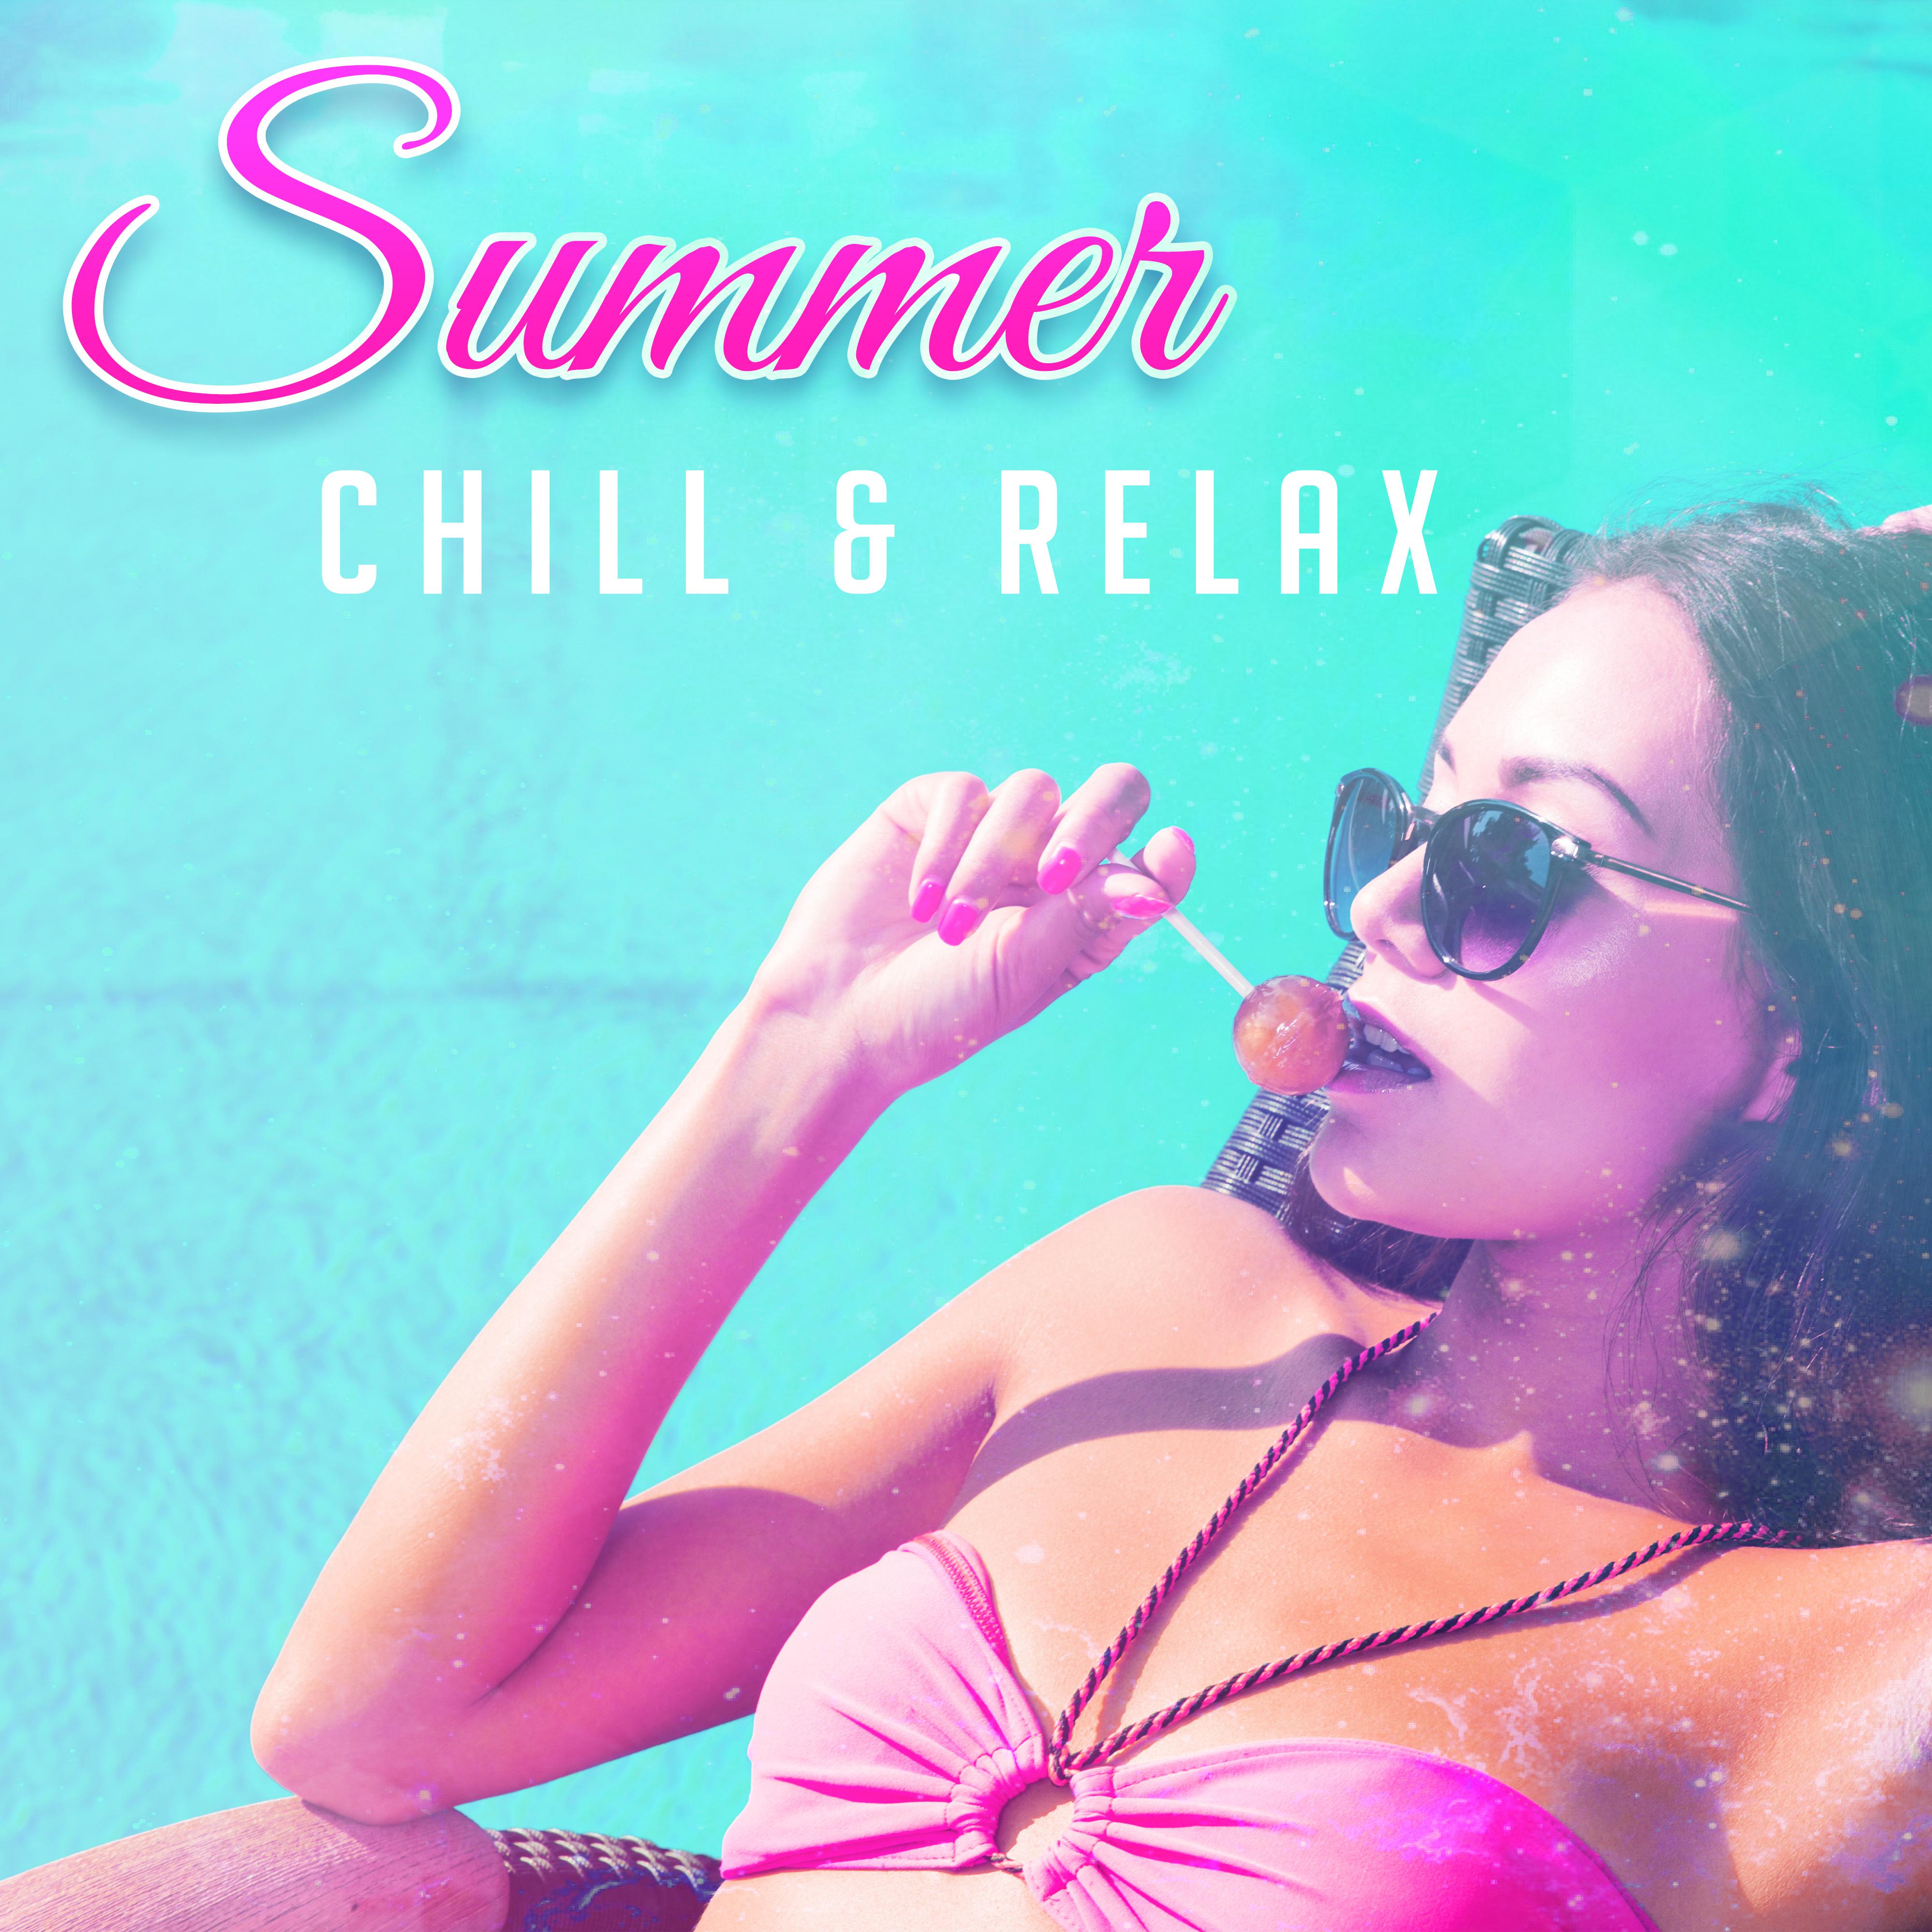 Summer Chill & Relax – Easy Listening, Stress Relief, Calming Sounds, Music to Calm Mind, Summer Rest